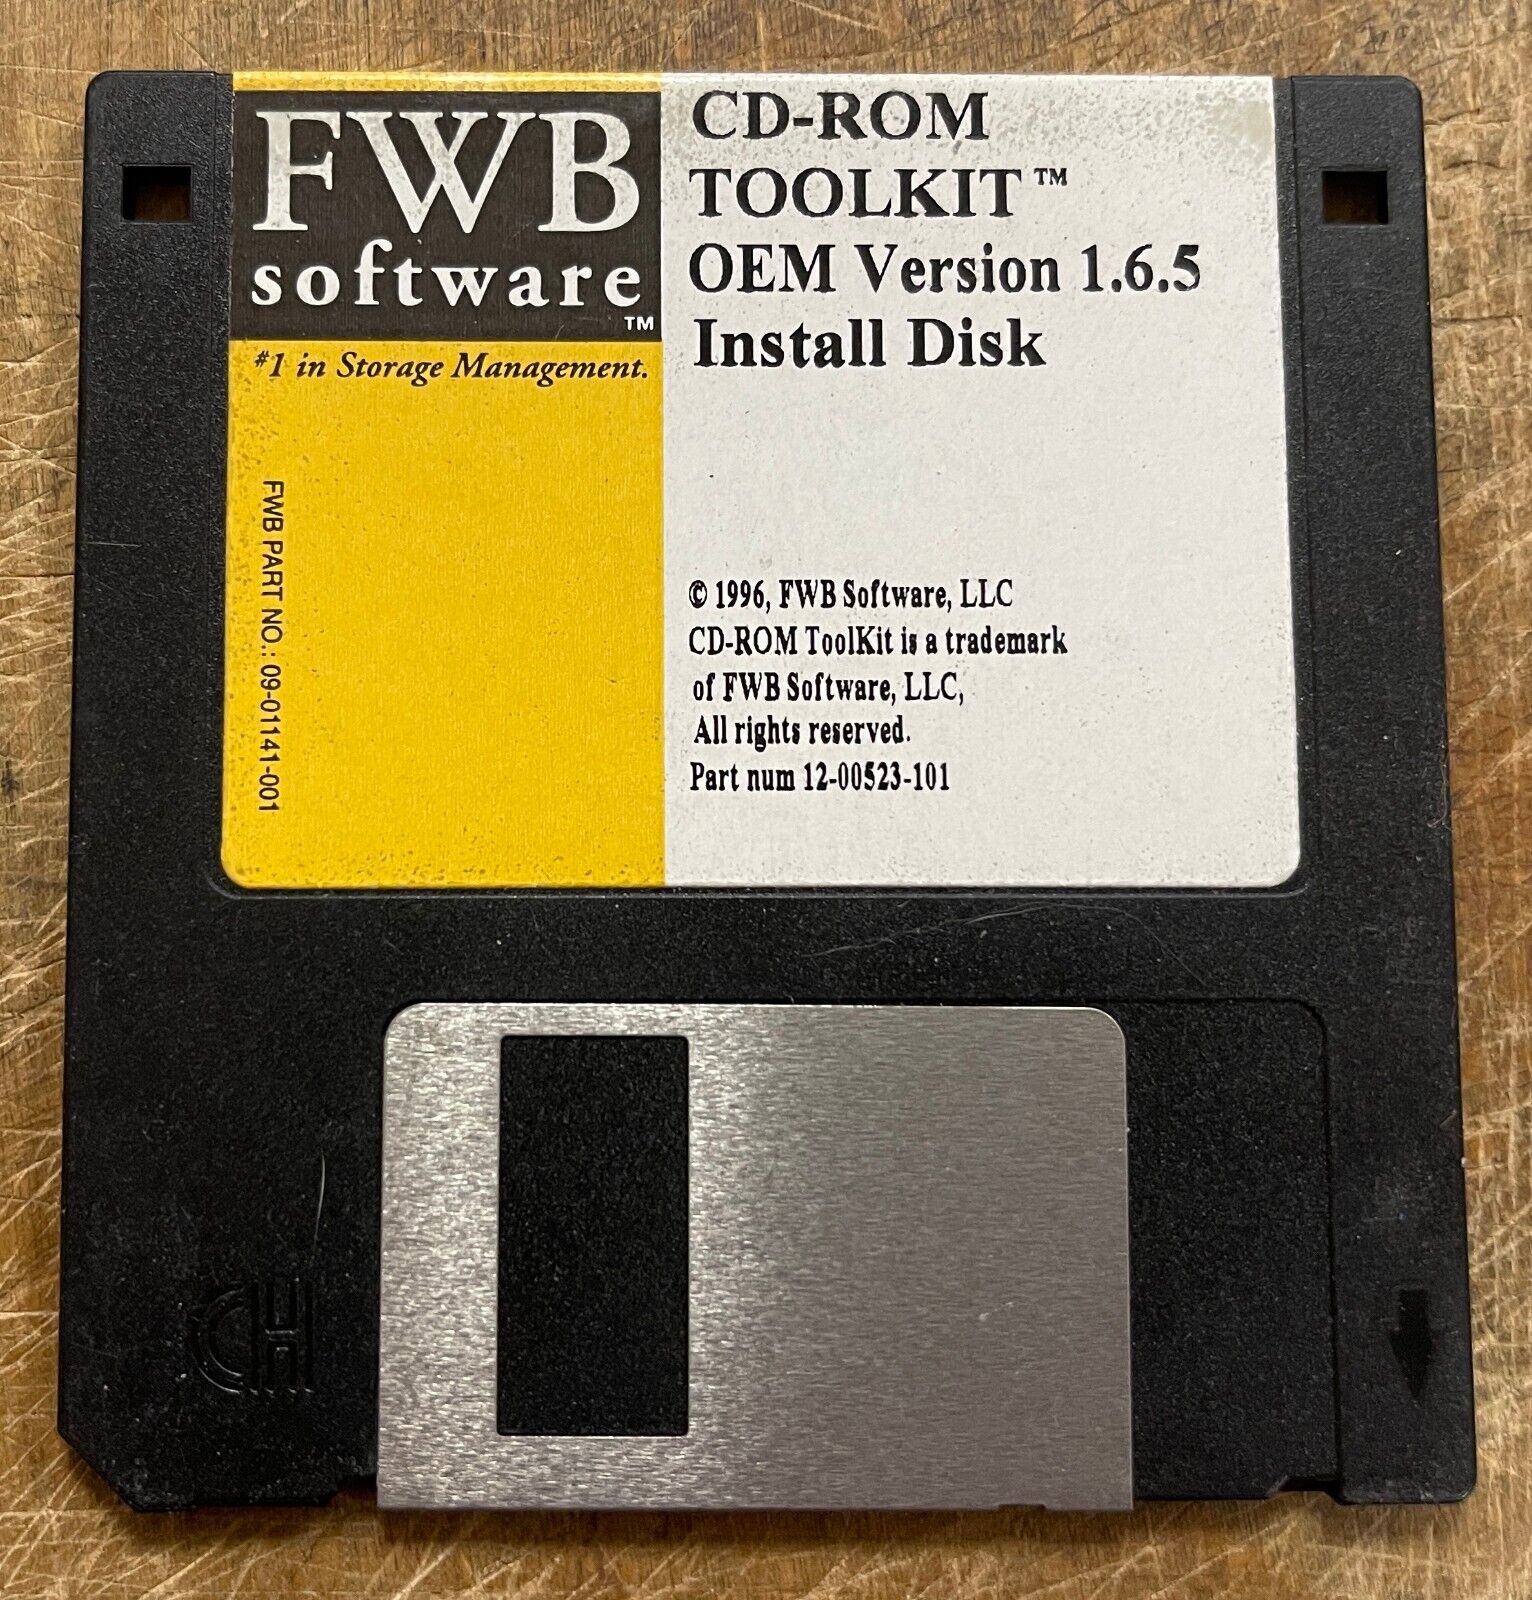 Vintage FWB CD-ROM TOOLKIT O EM Version 1.6.5 Floppy TESTED and WORKING